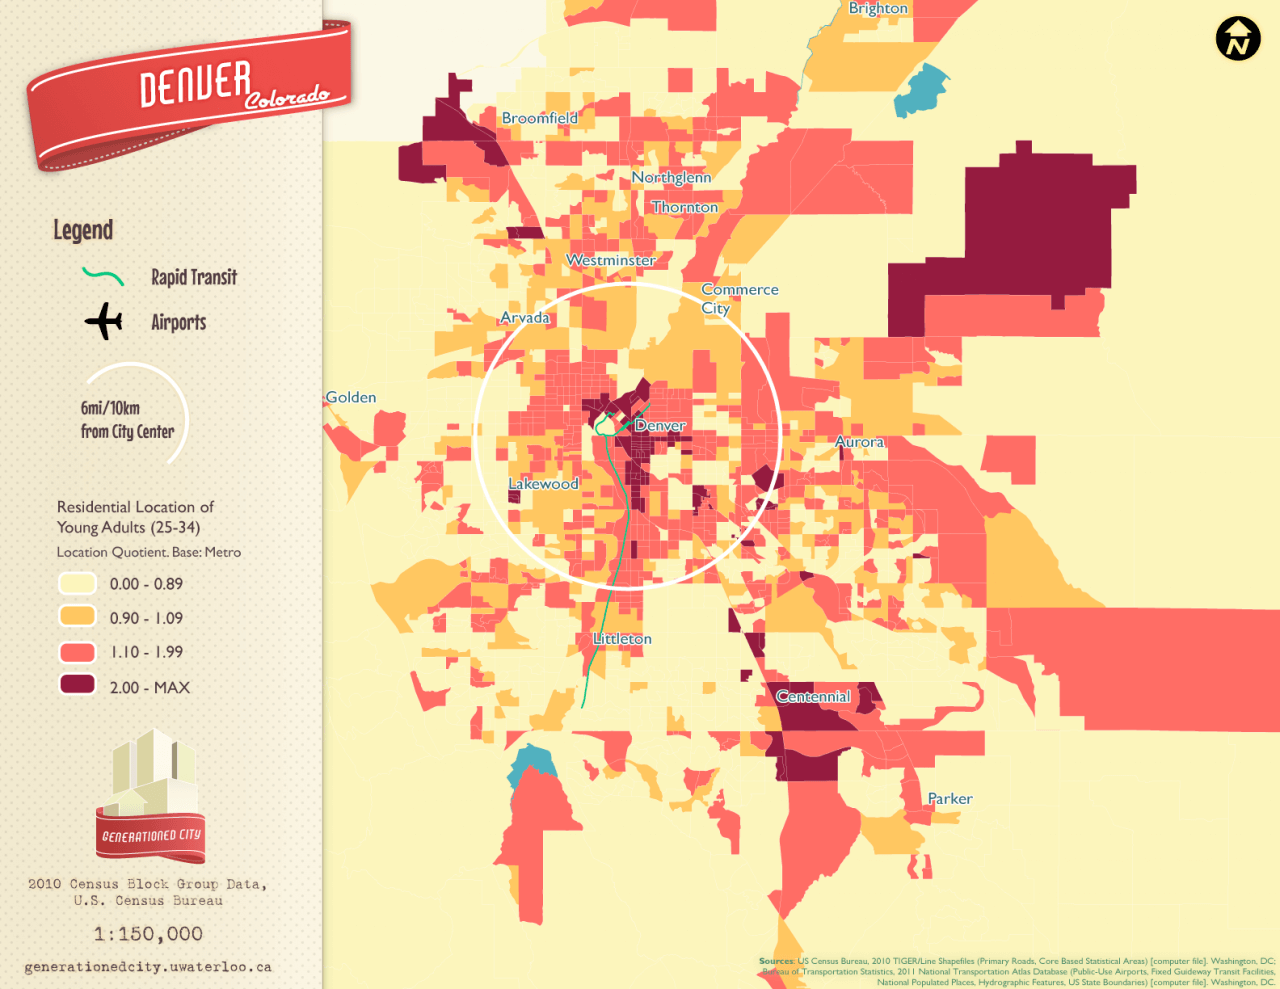 Residential location of young adults in Denver.